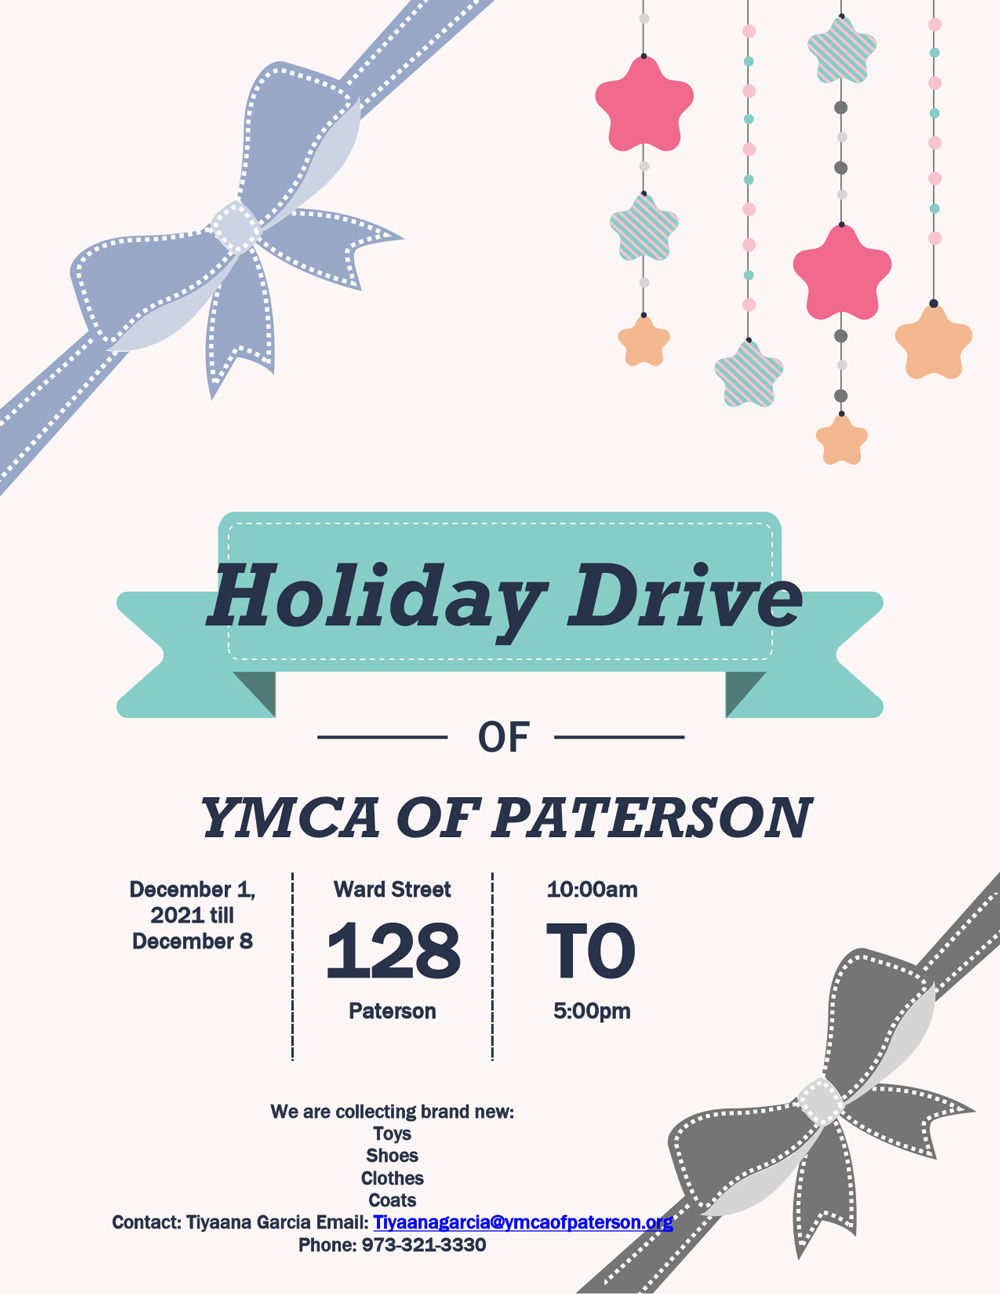 YMCA of Paterson Holiday Drive flyer